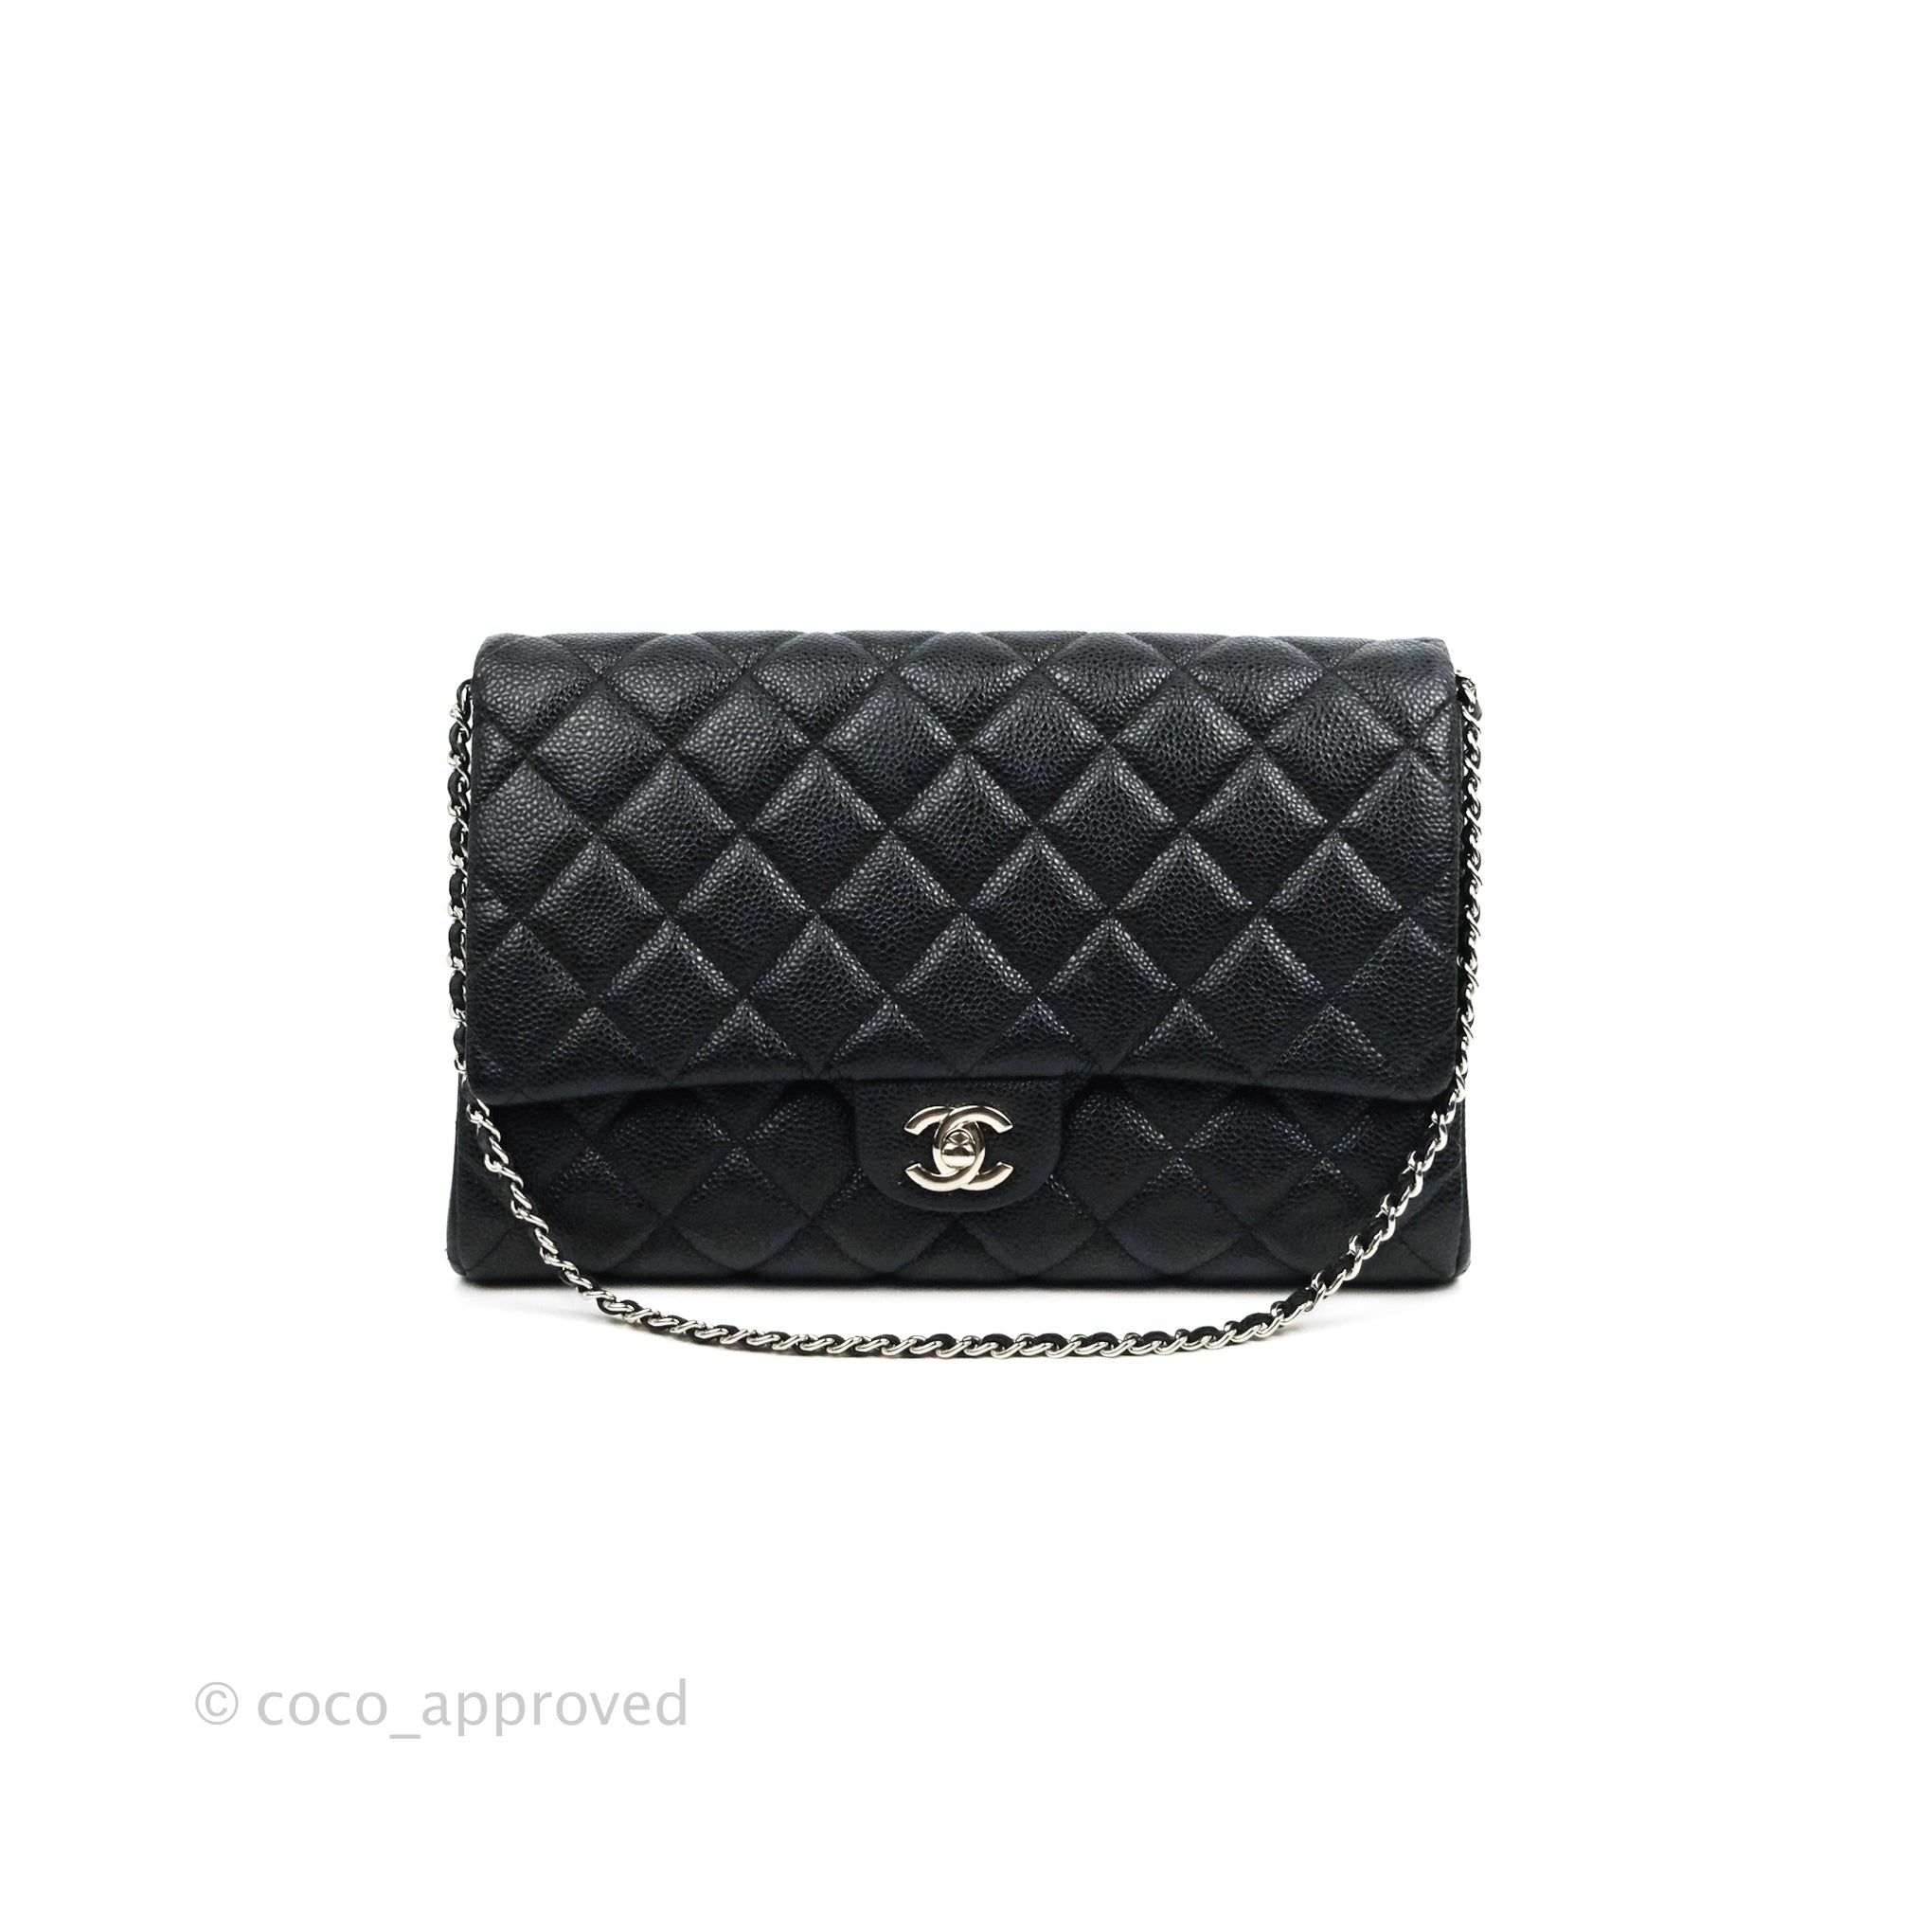 Black Quilted Caviar Leather Jumbo Classic Single Flap Bag Silver Hardware,  2007/2008, Handbags & Accessories, 2021